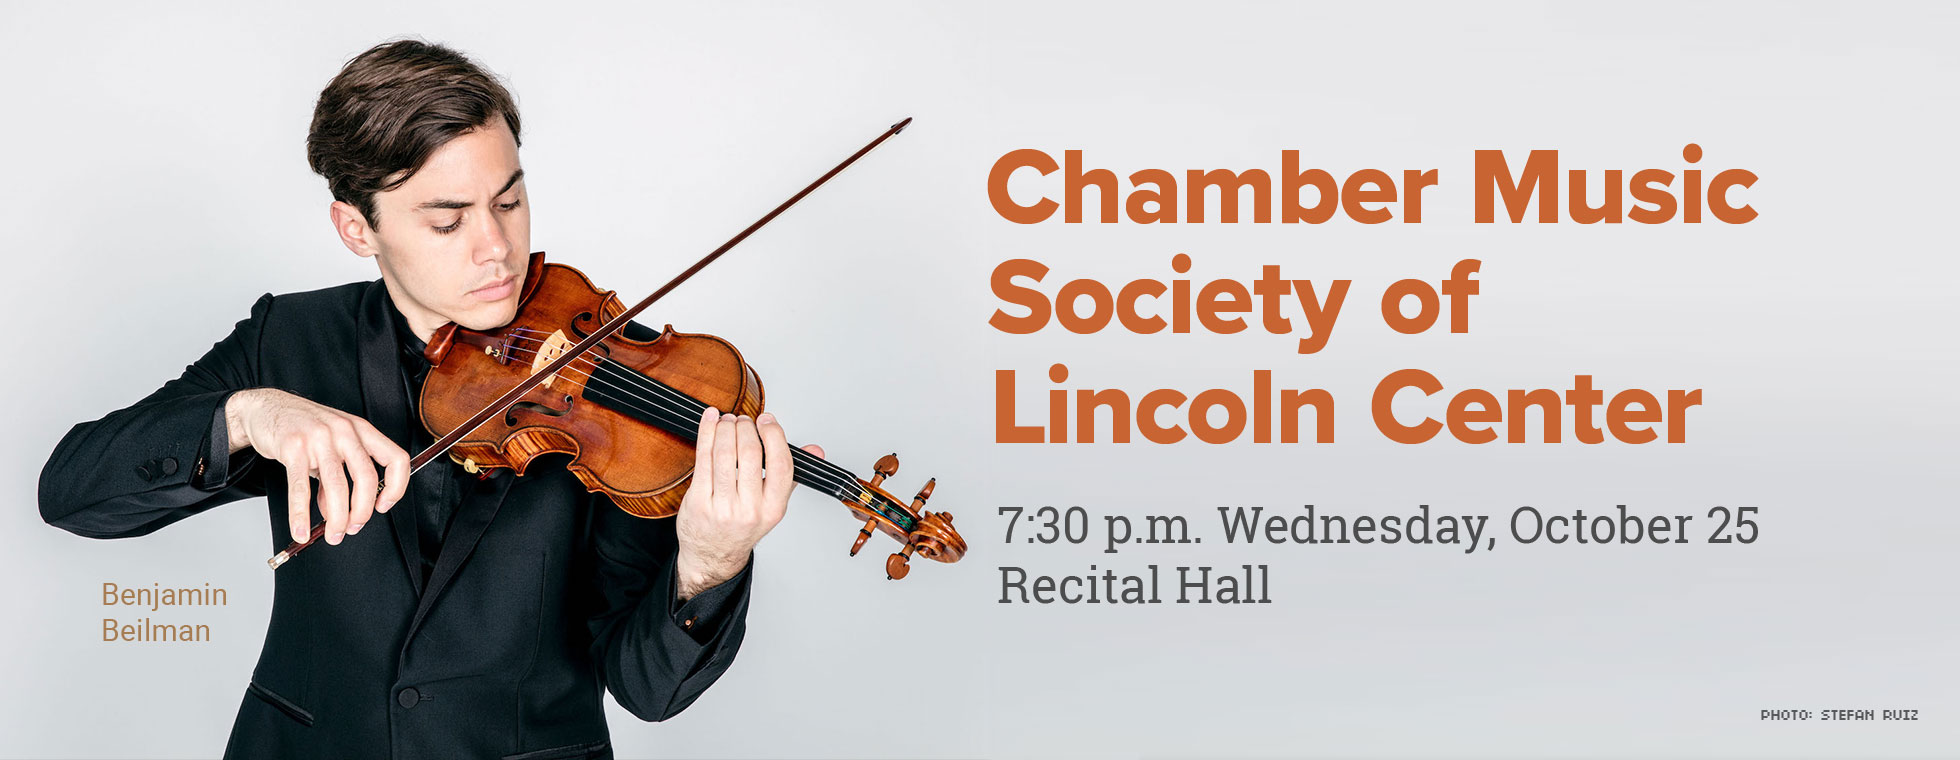 Chamber Music Society of Lincoln Center 7:30 p.m. Wednesday, October 25 in Recital Hall